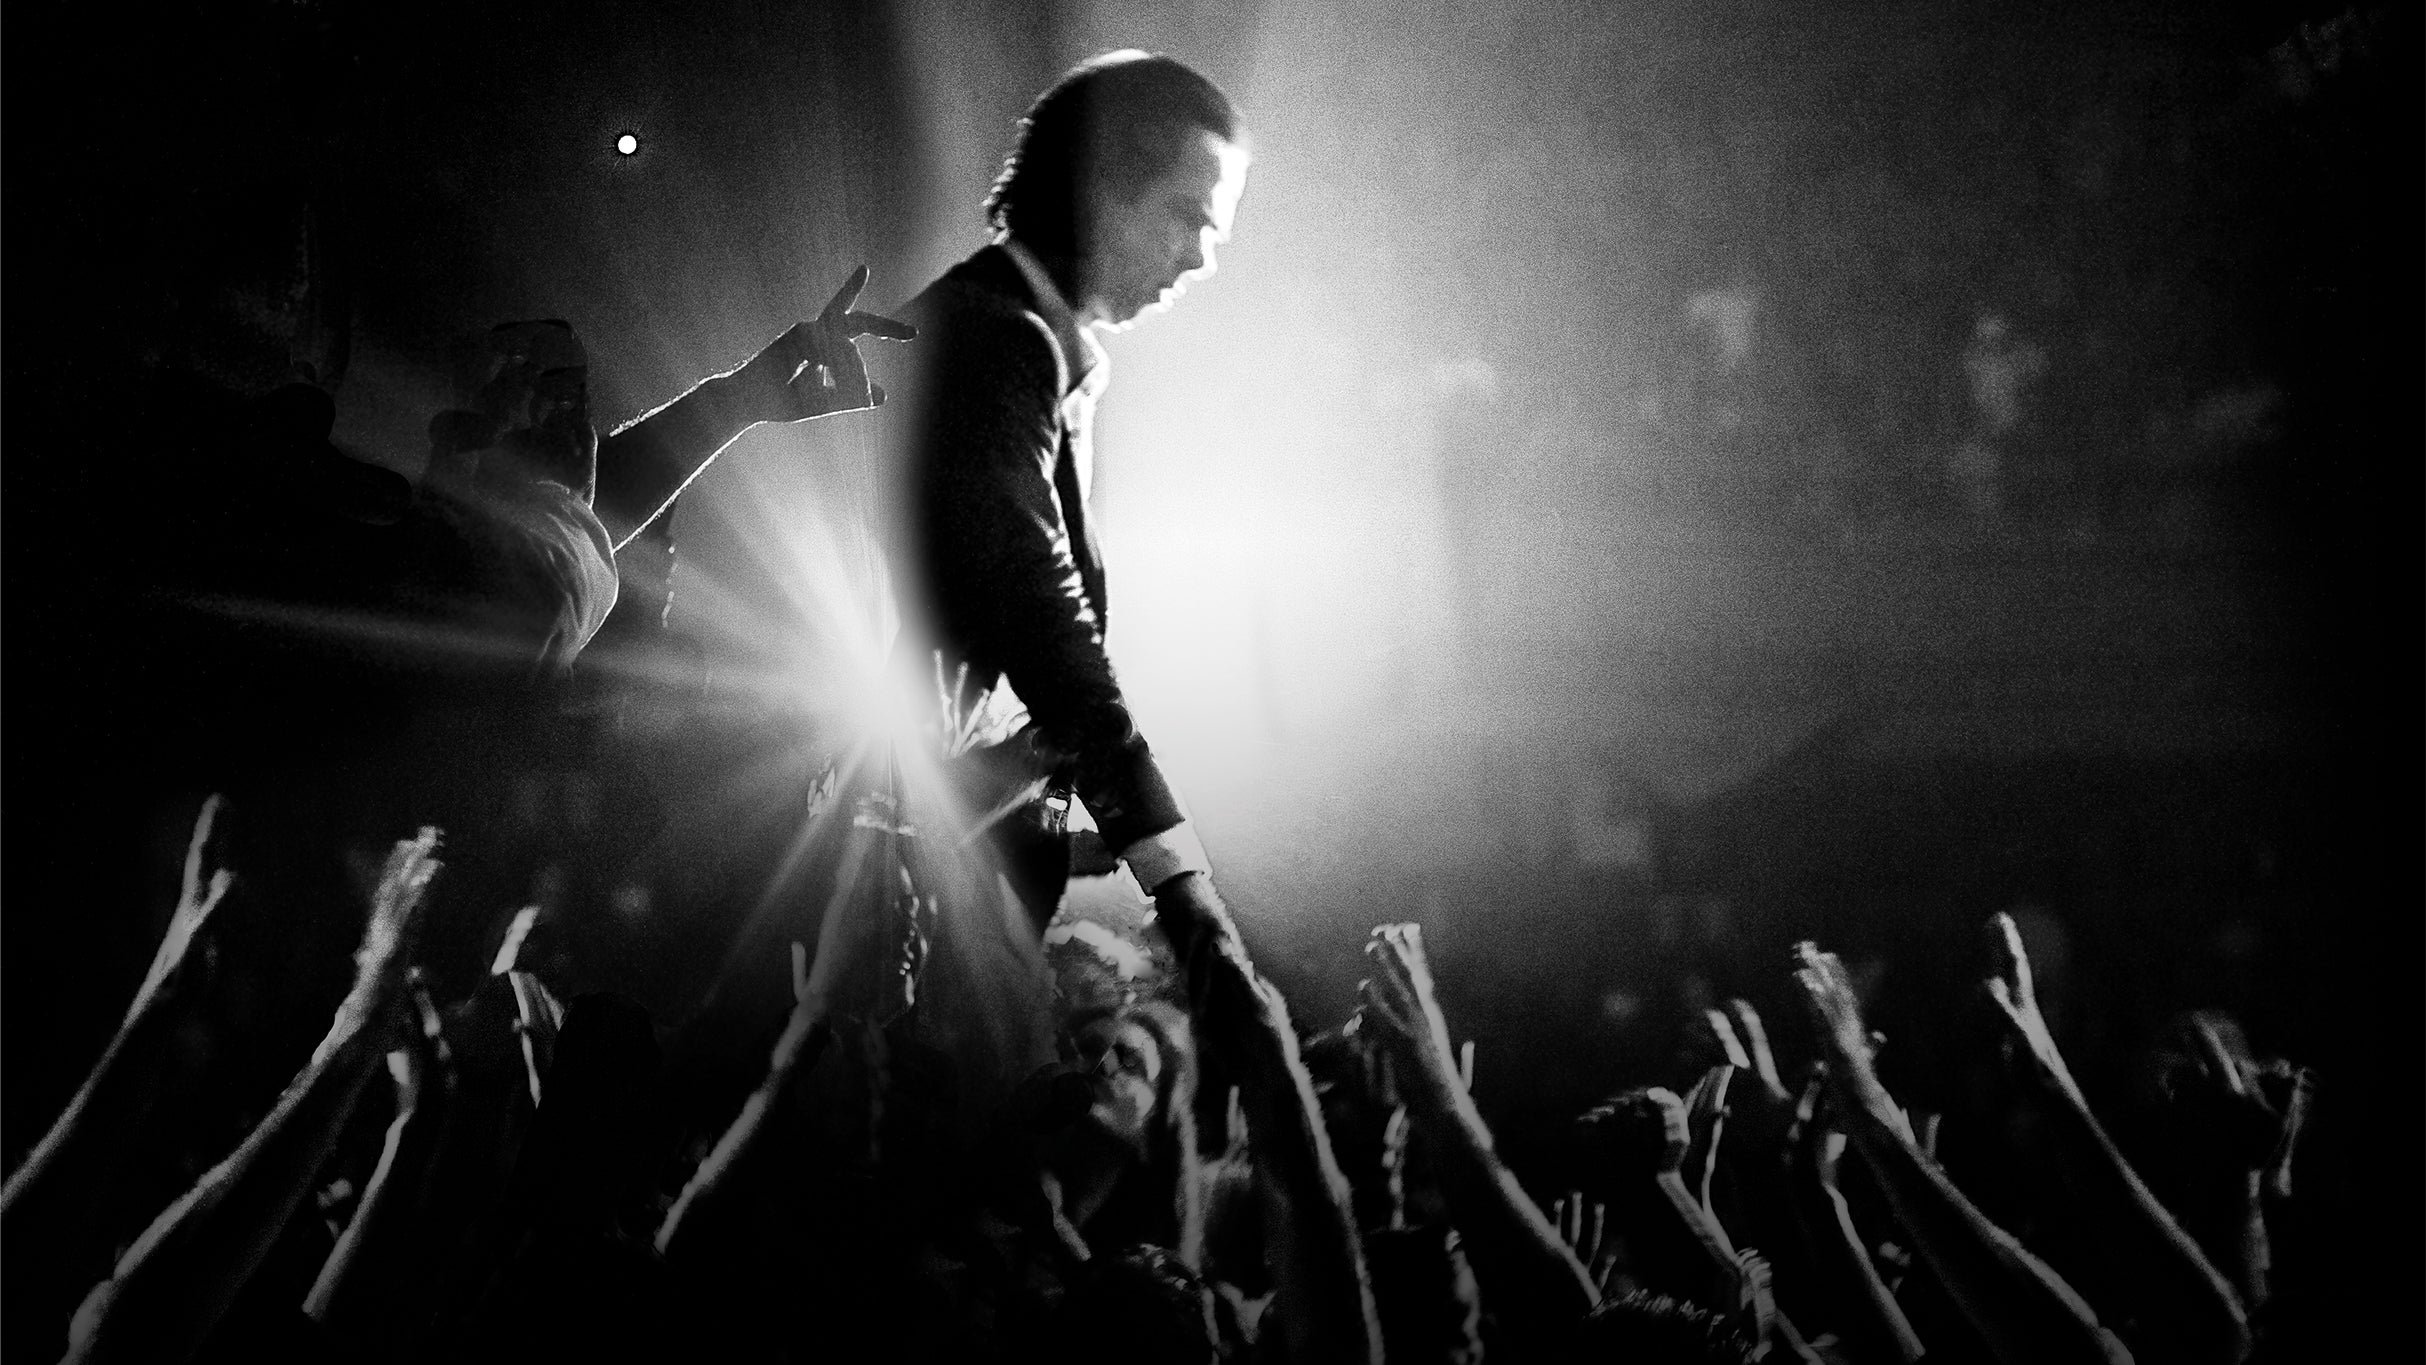 Nick Cave & the Bad Seeds : The Wild God Tour in London promo photo for Spotify presale offer code